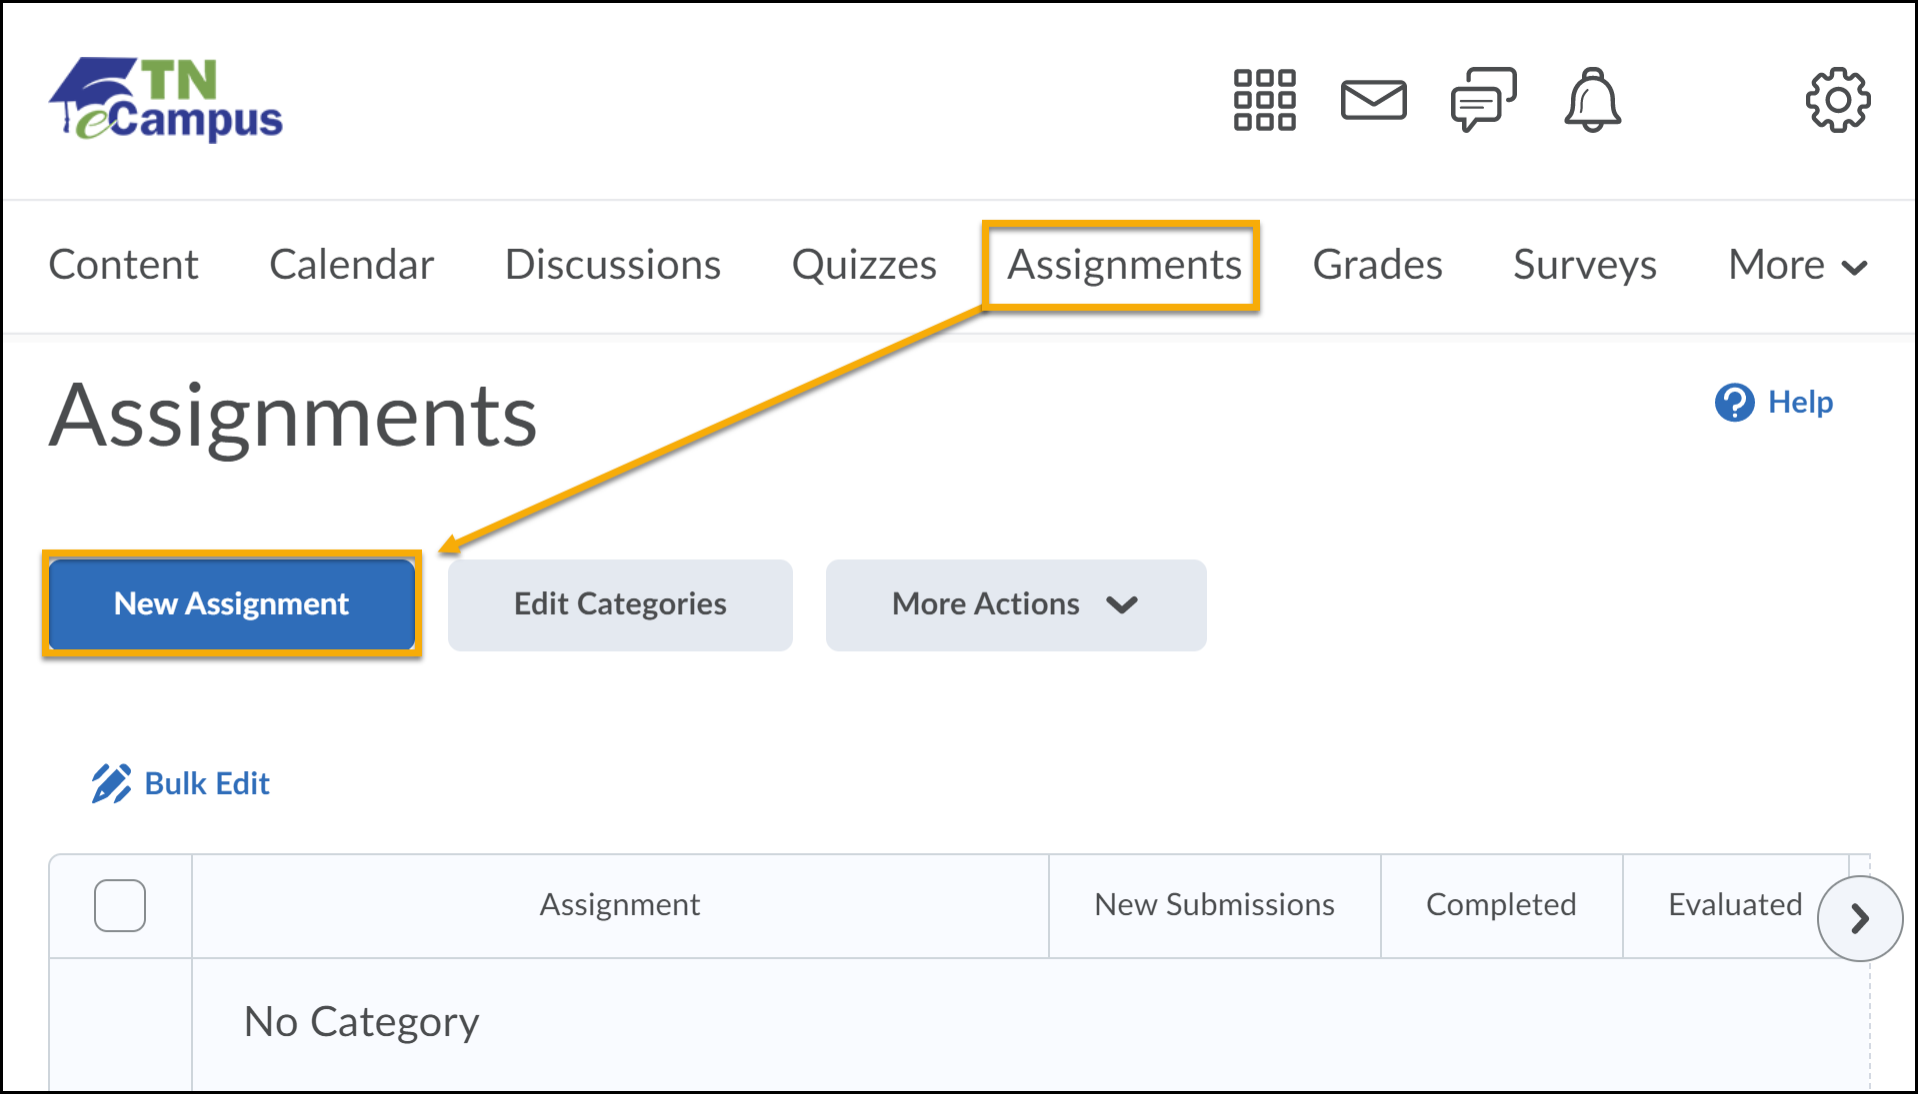 Assignments highlighted from the NavBar with arrow pointing to New Assignment.